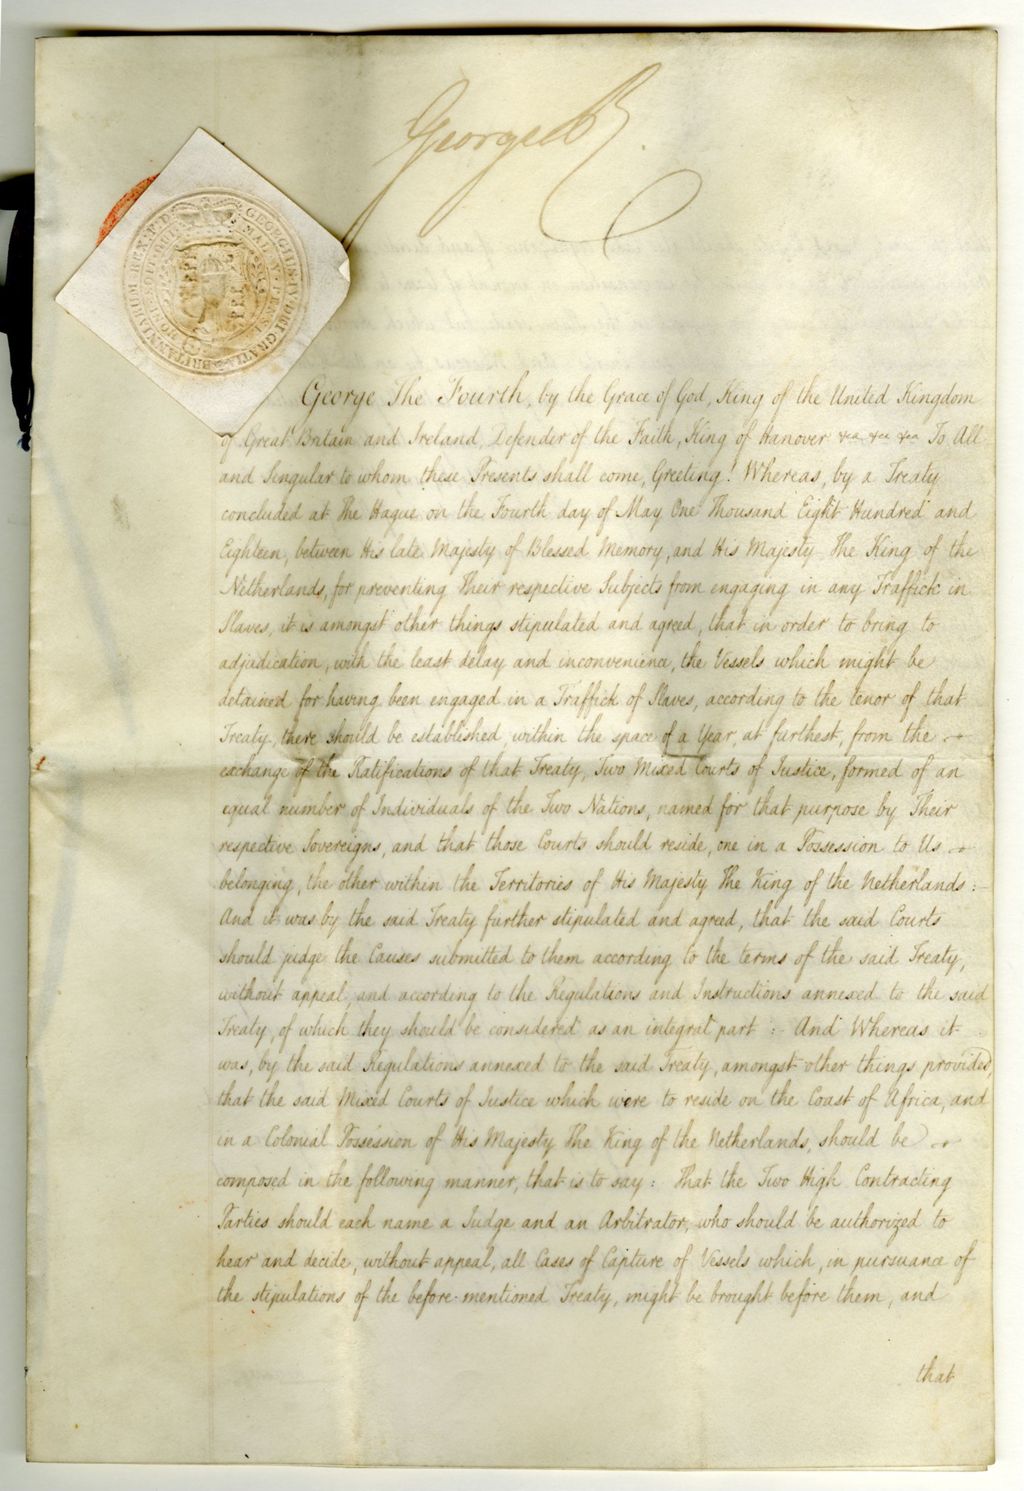 Miniature of Royal Warrant, May 4, 1818, signed by George IV